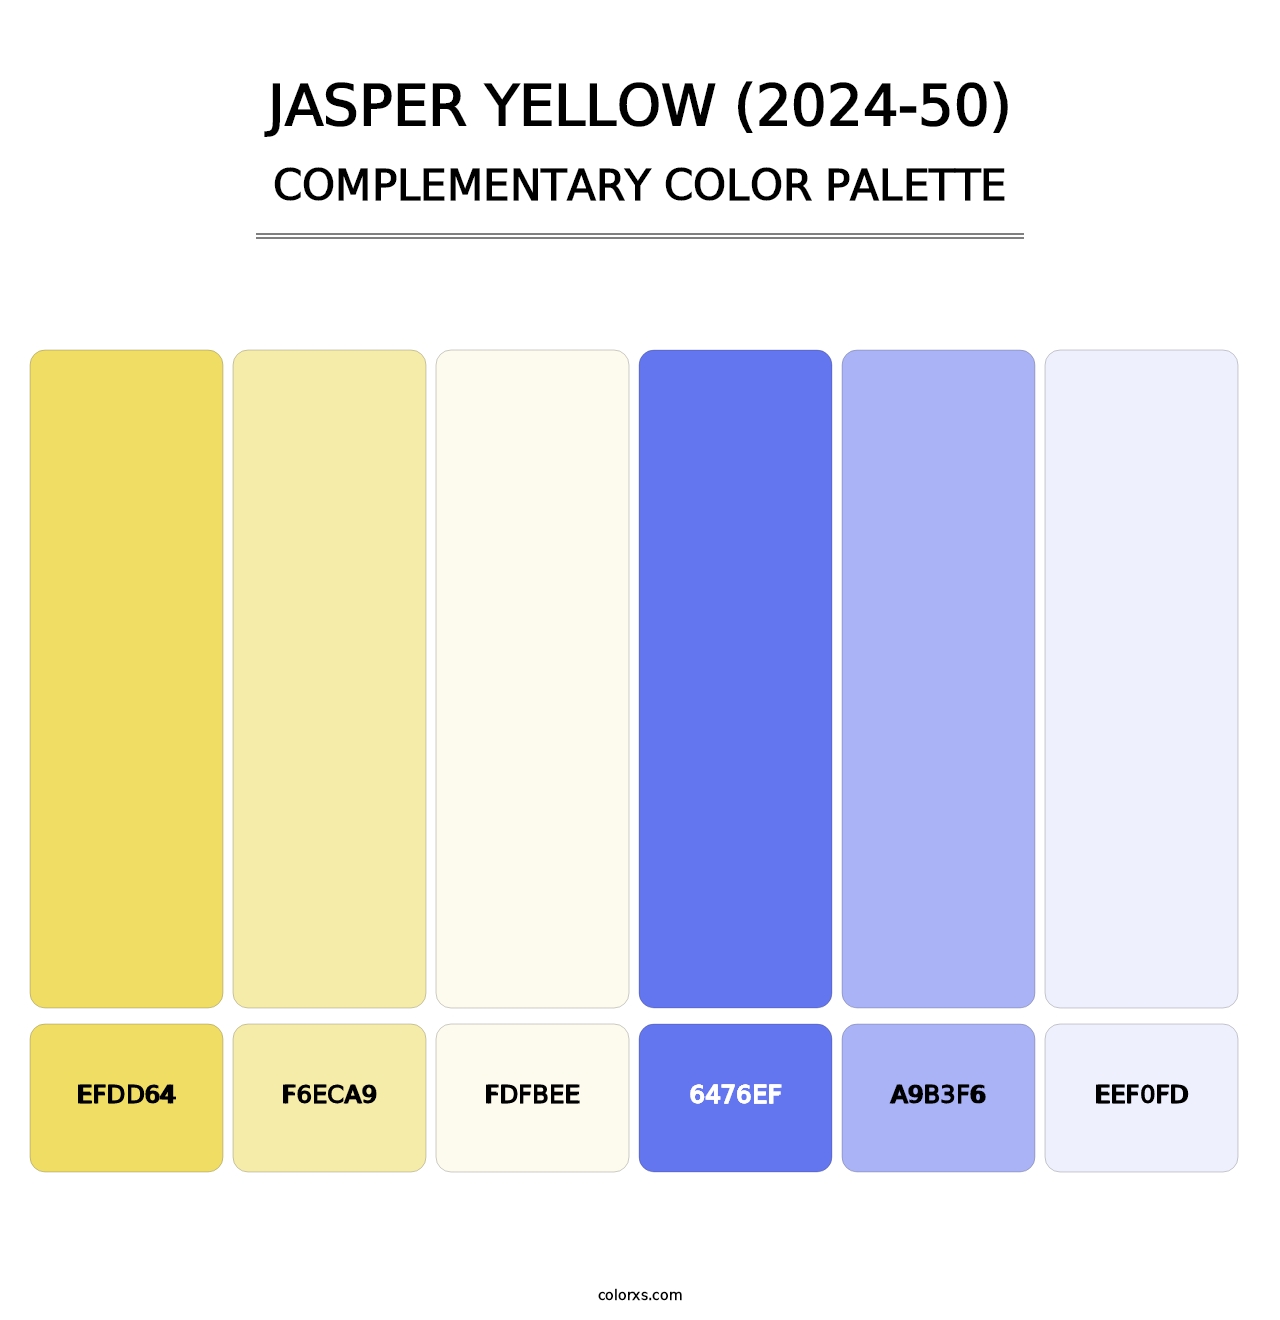 Jasper Yellow (2024-50) - Complementary Color Palette